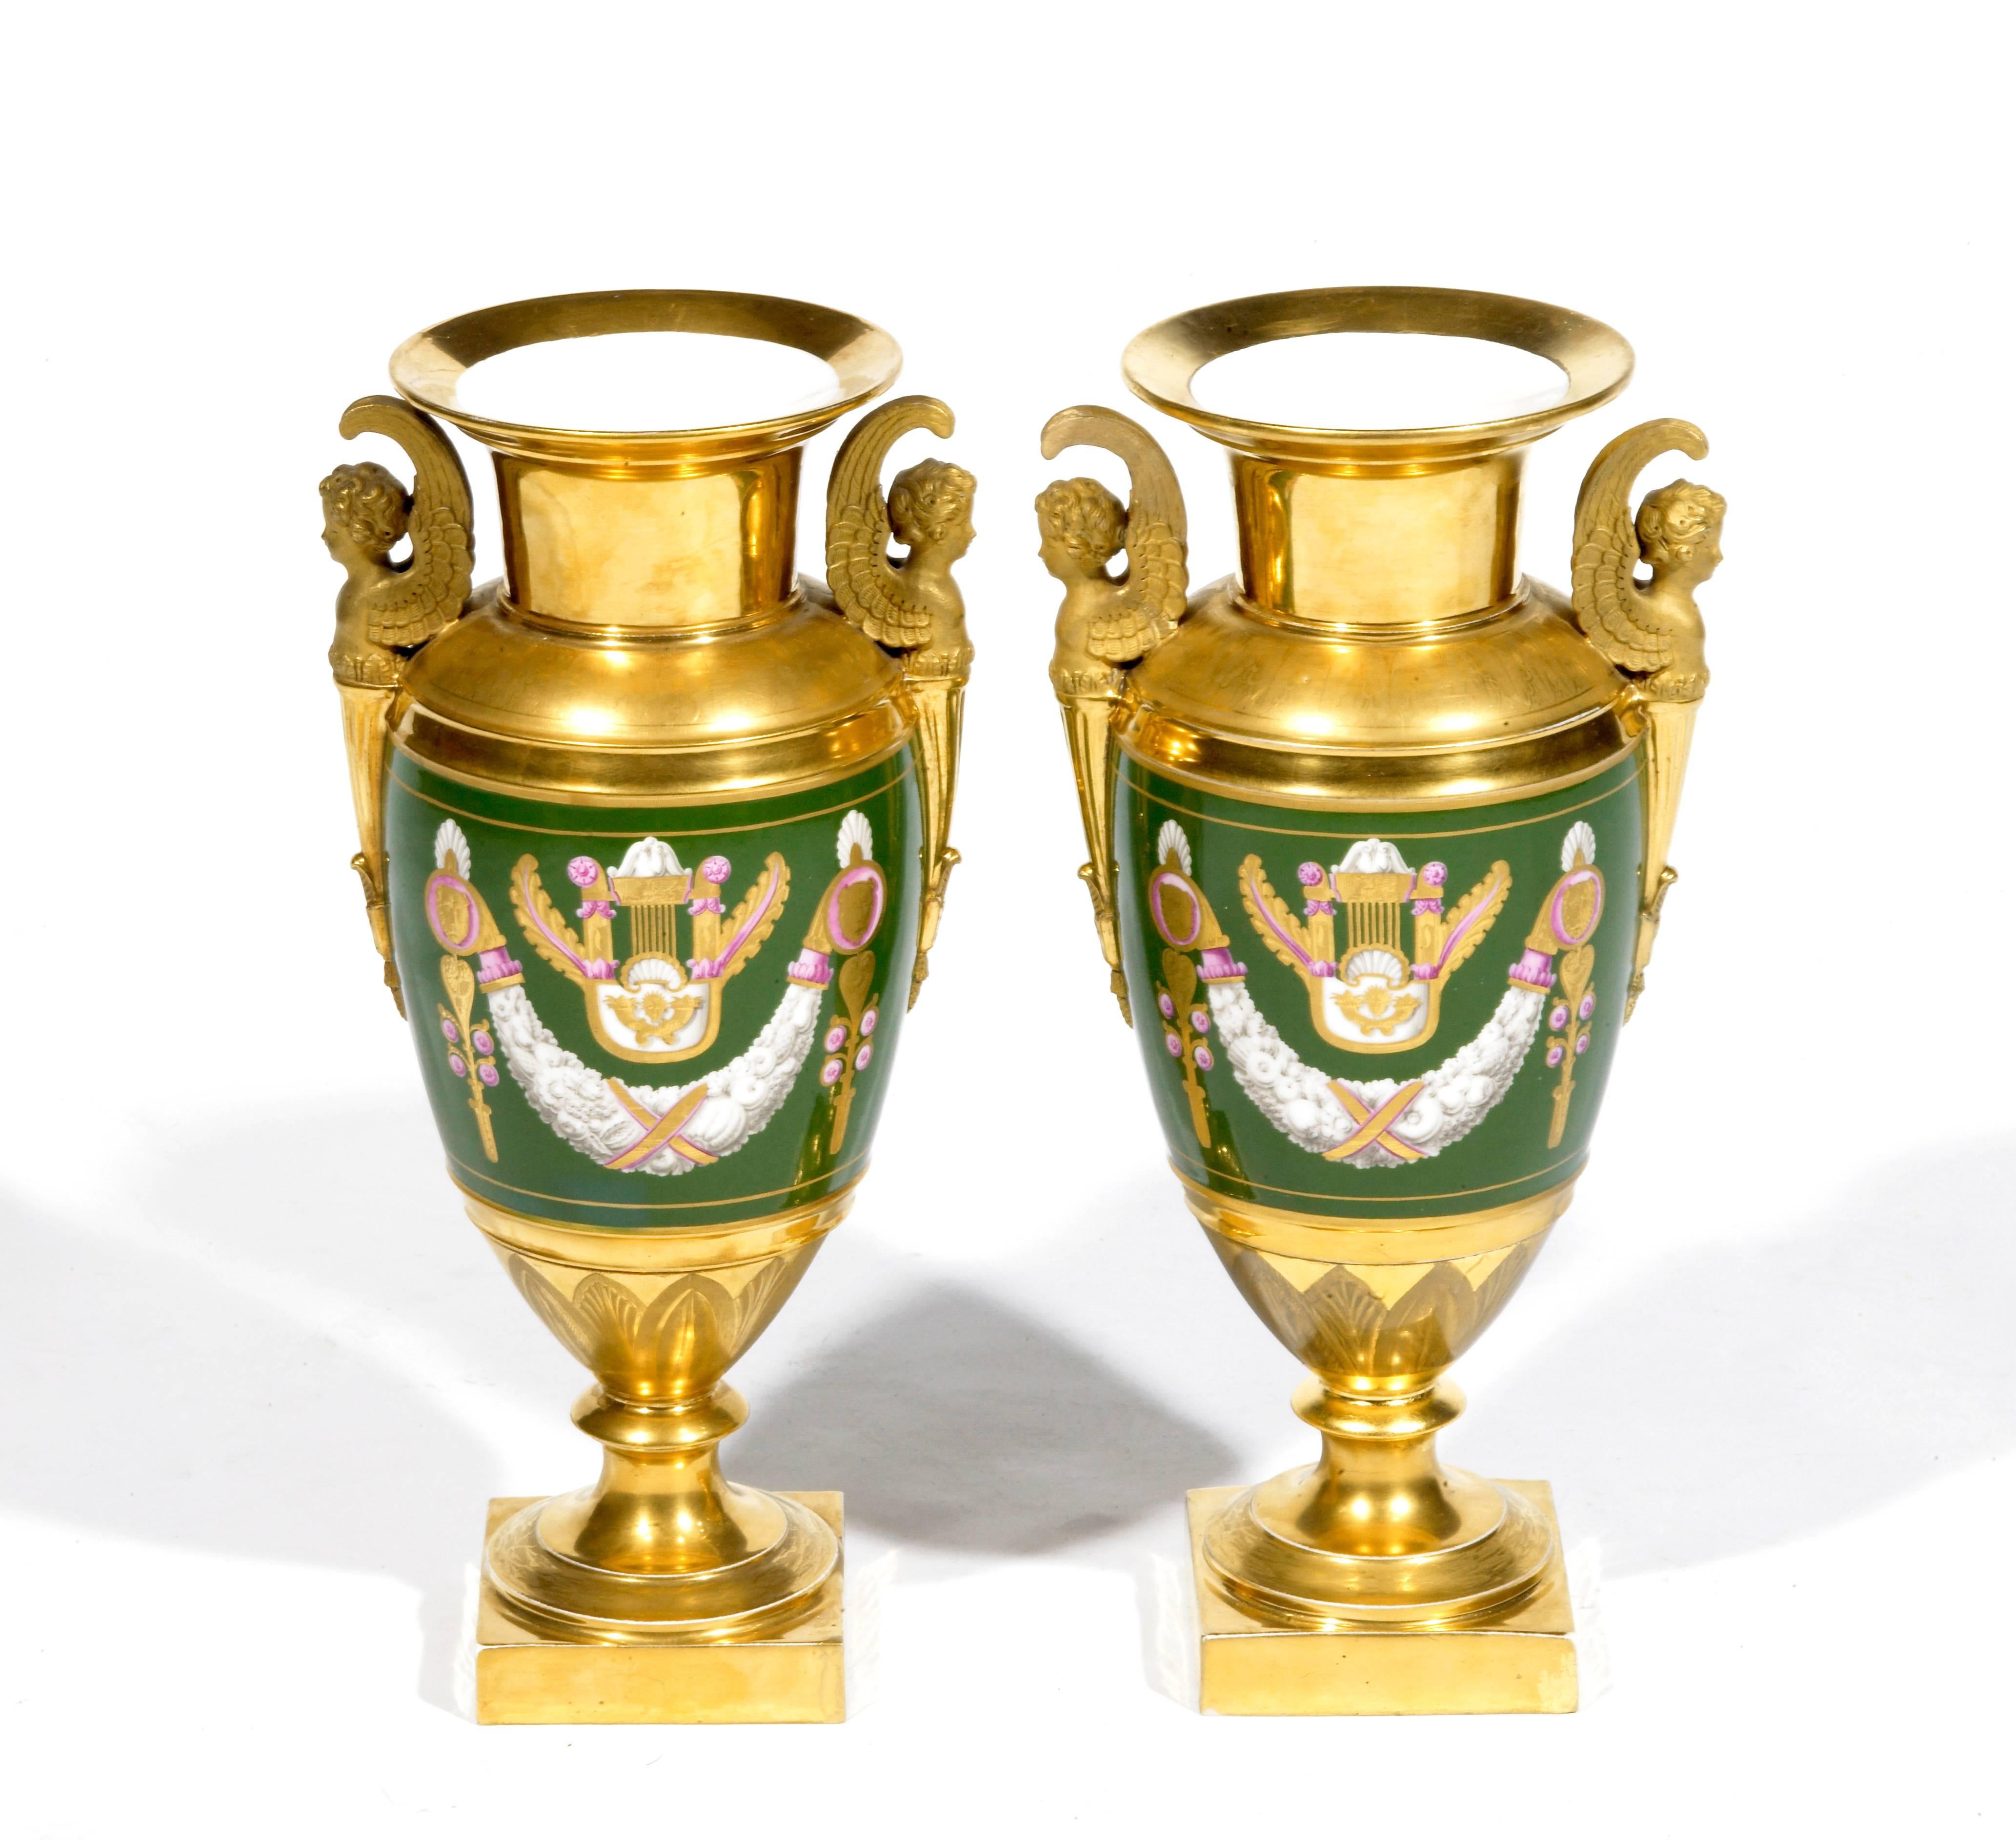 19th century pair of Paris porcelain vases of gilt and green glaze depicting classical scenes. Inscribed with ‘F’ mark on the base.